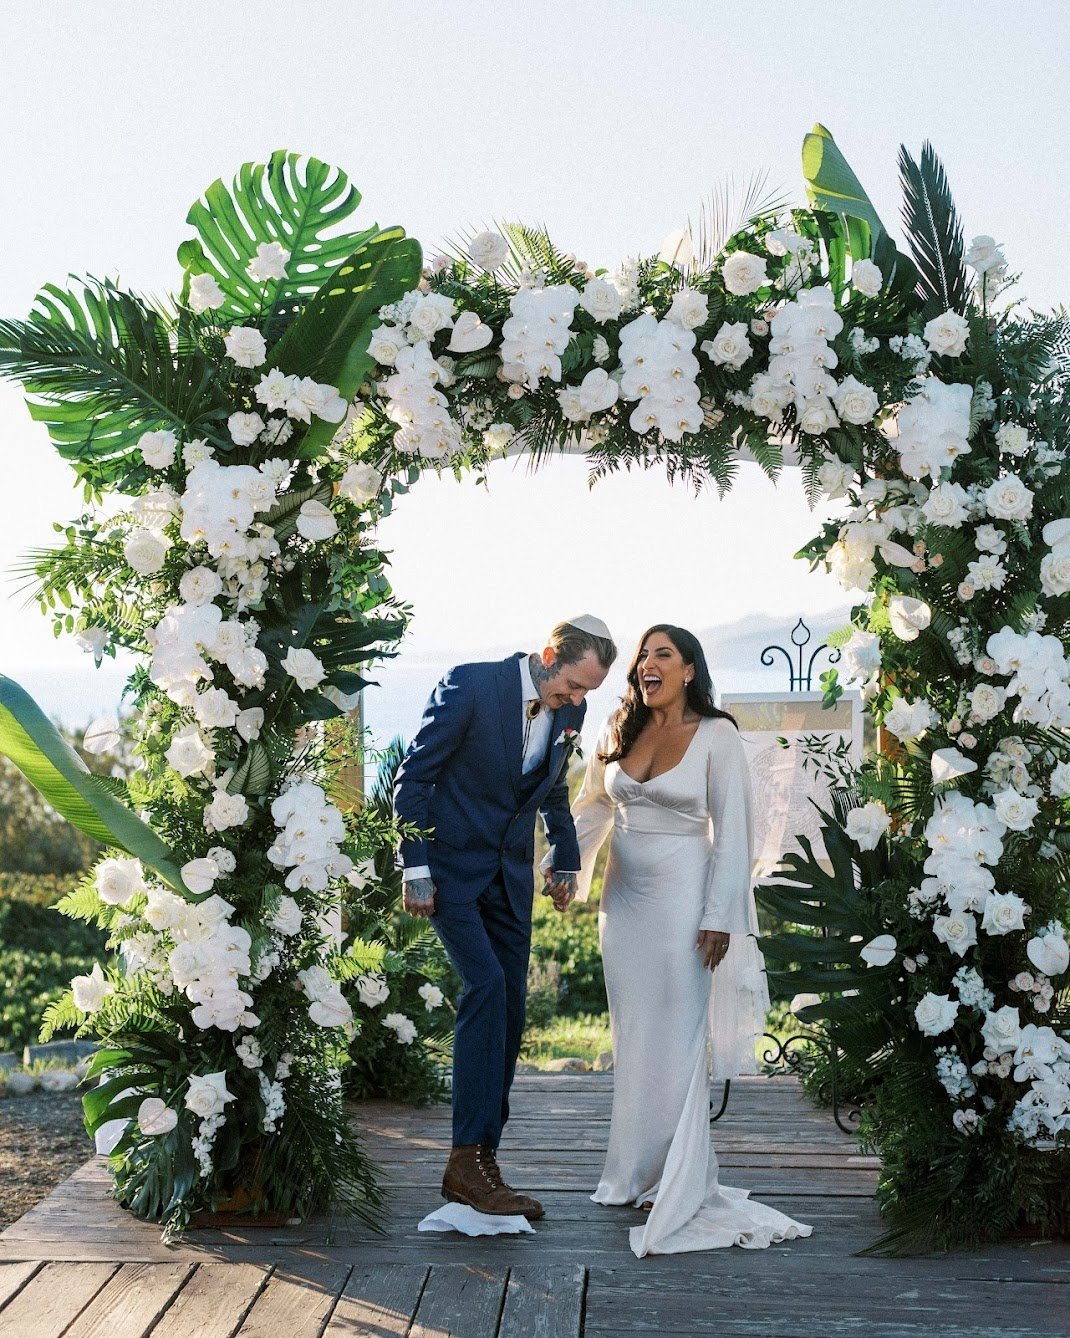 www.santabarbarawedding.com | Boho Chic Dreams | Madeleine Collins Photography | Ivy Weddings &amp; Events | Dos Pueblos Orchid Farm | Wedding Arch Covered in White Blooms